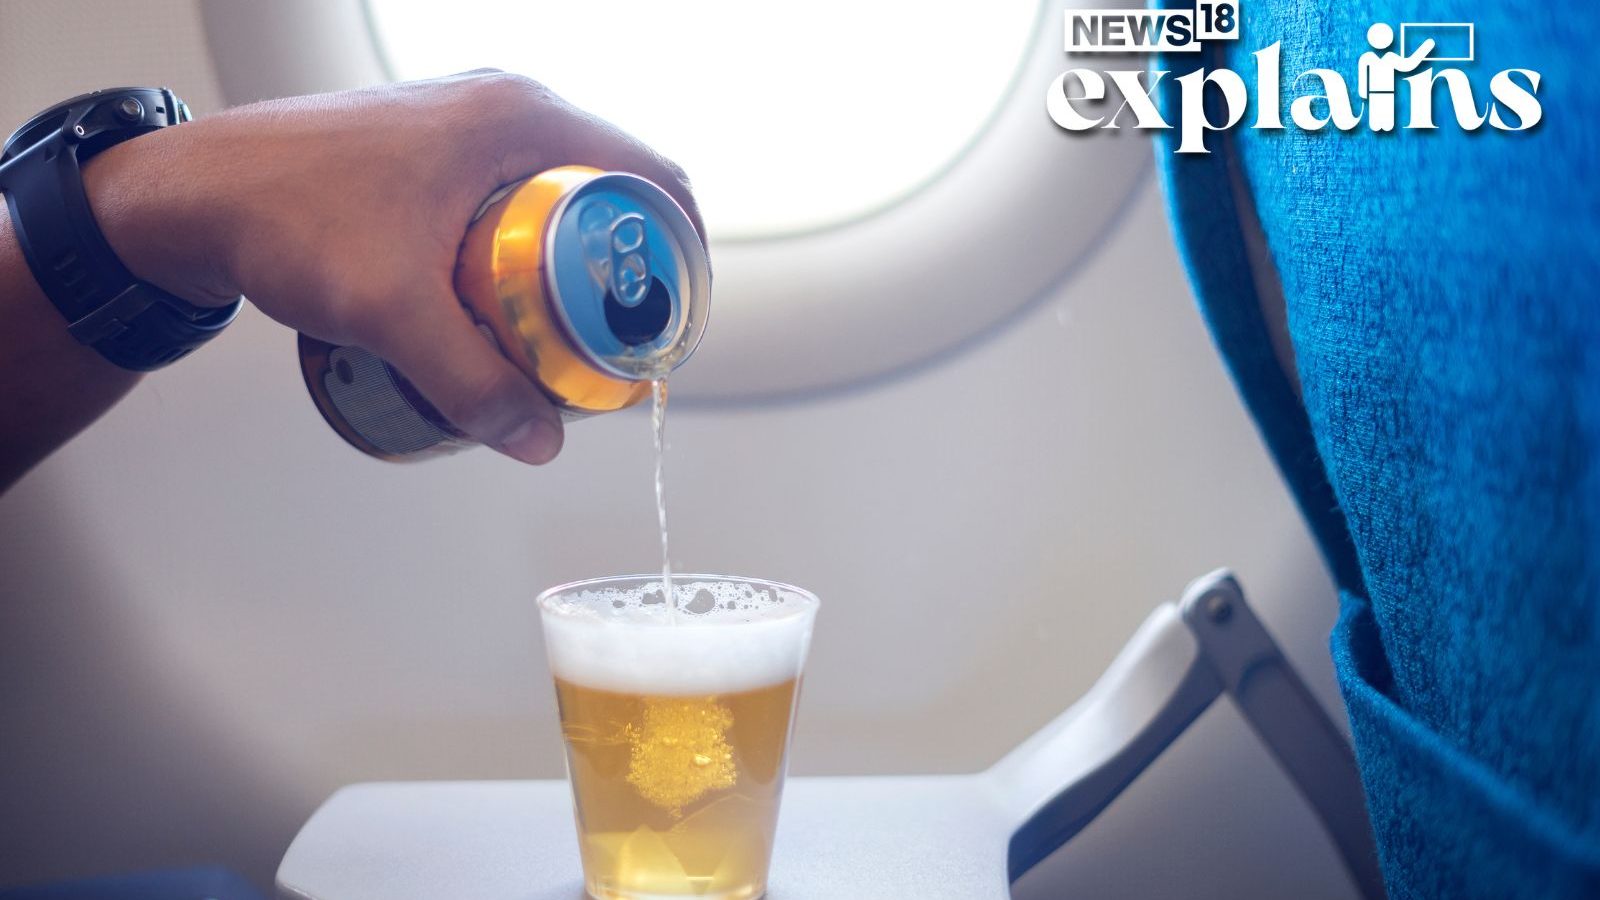 ‘Peeing’ Case on Flight: Man Urinates in Sleep After Drinking, Could This Happen to You? A Hormone Decides